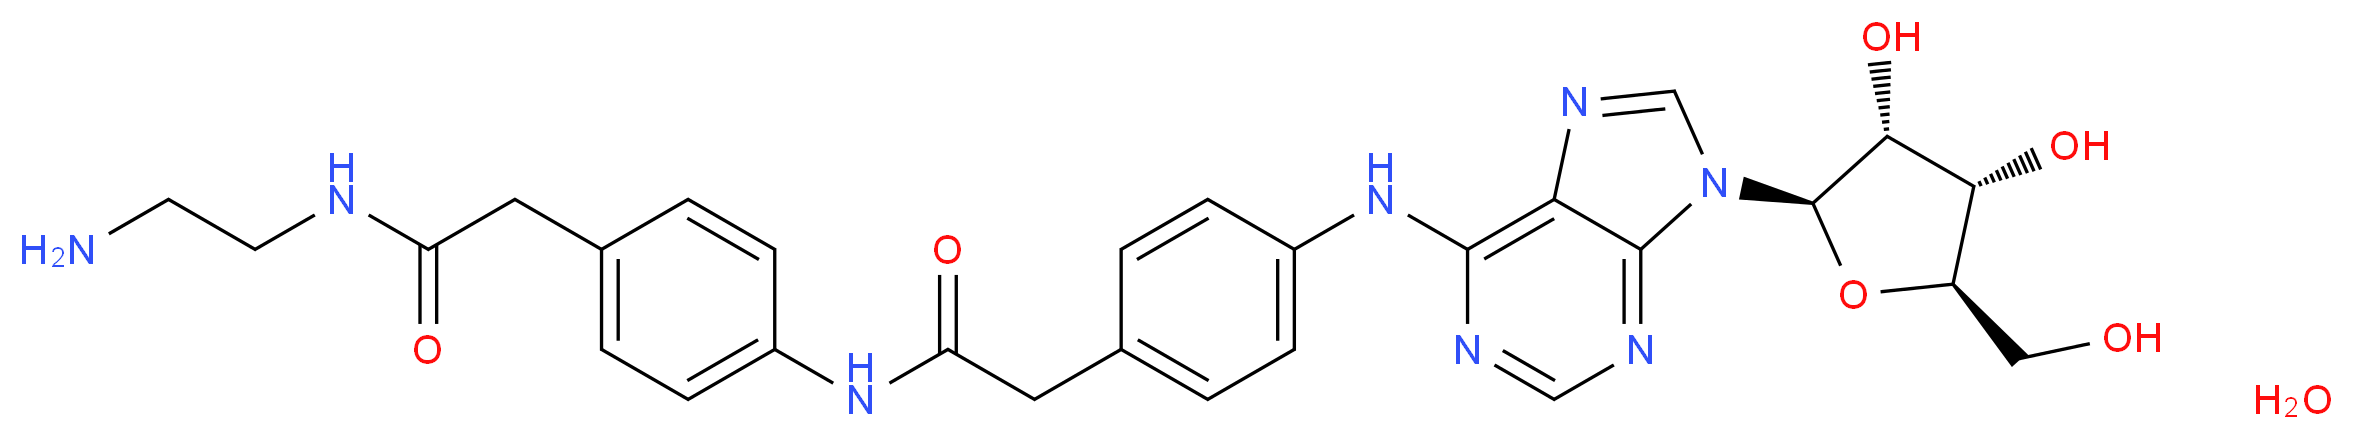 CAS_96760-69-9(anhydrous) molecular structure